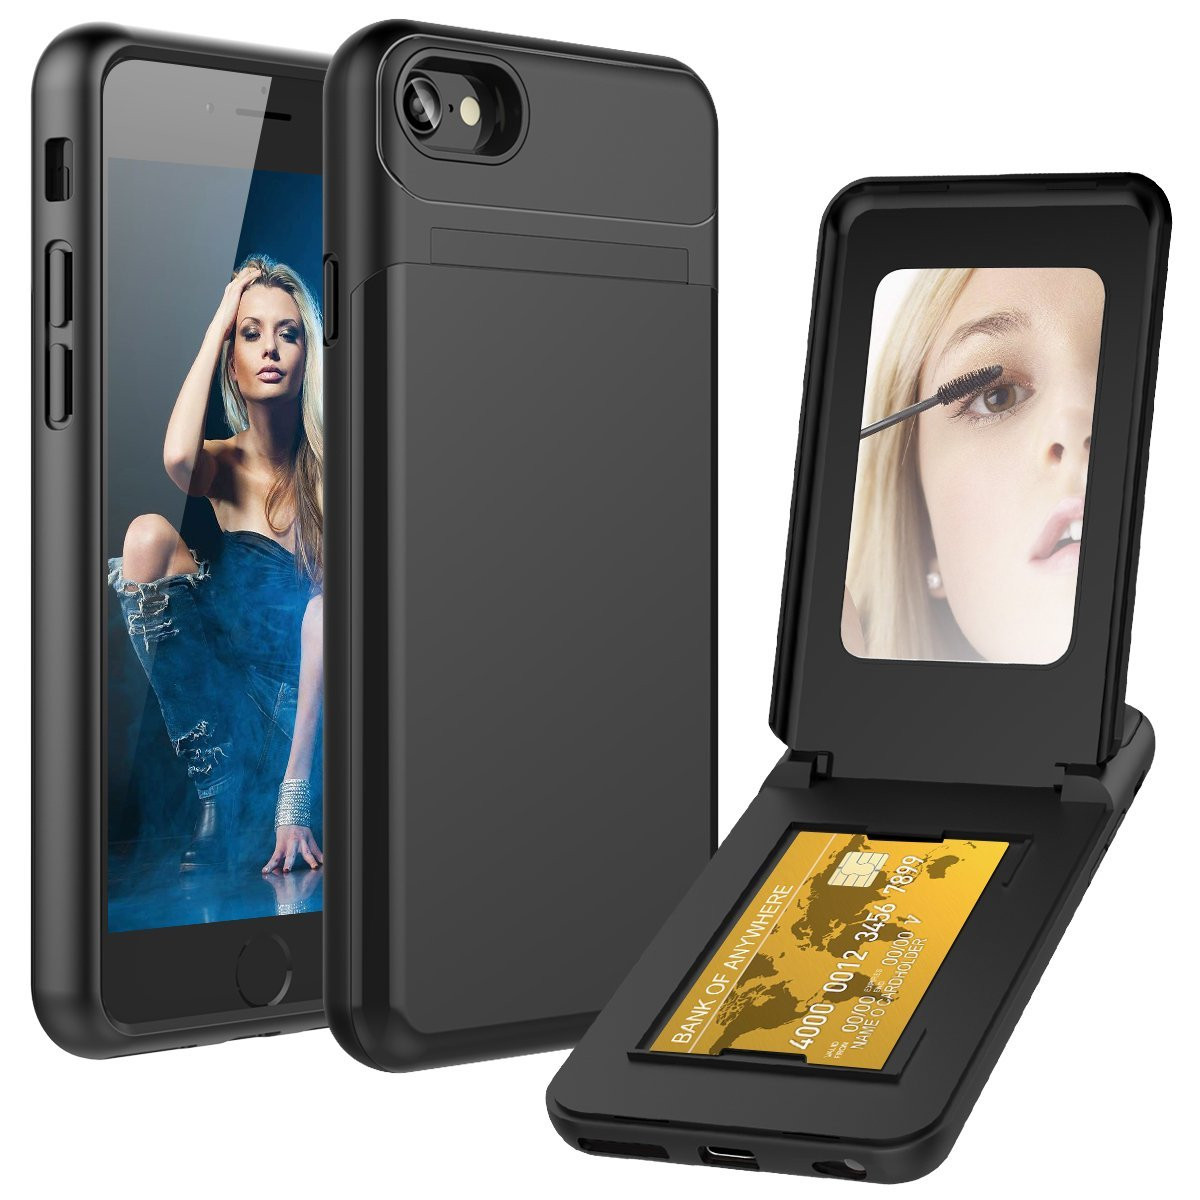 Apple iPhone 6s -  Hard Phone Case with Hidden Mirror and Card Holder Compartment, Black